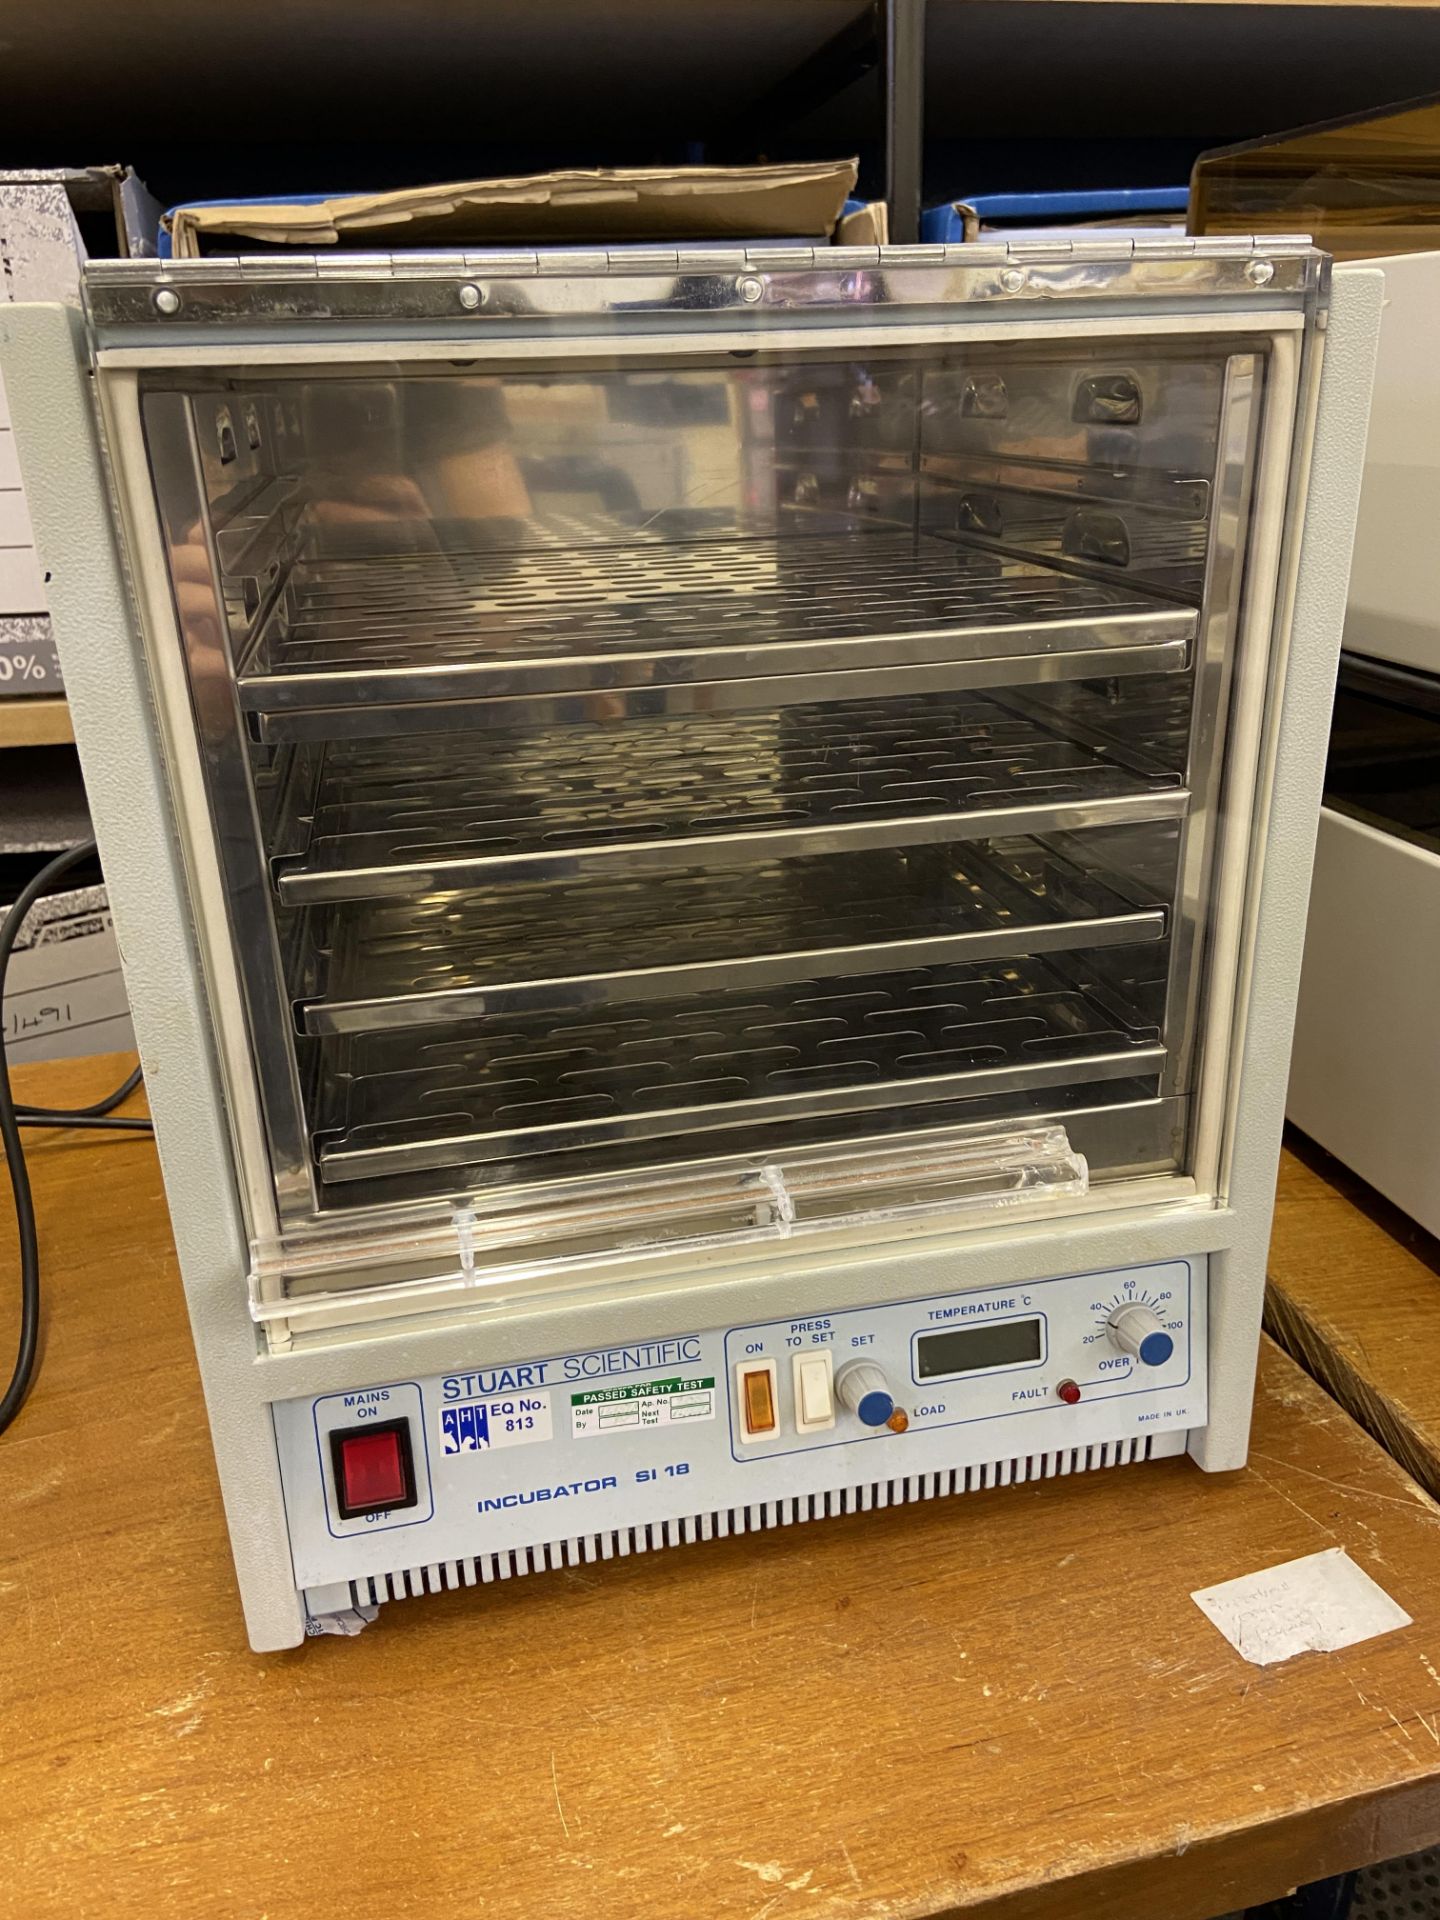 Stuart Scientific S1-18 incubator, Serial No. 5077 with 240v power cable